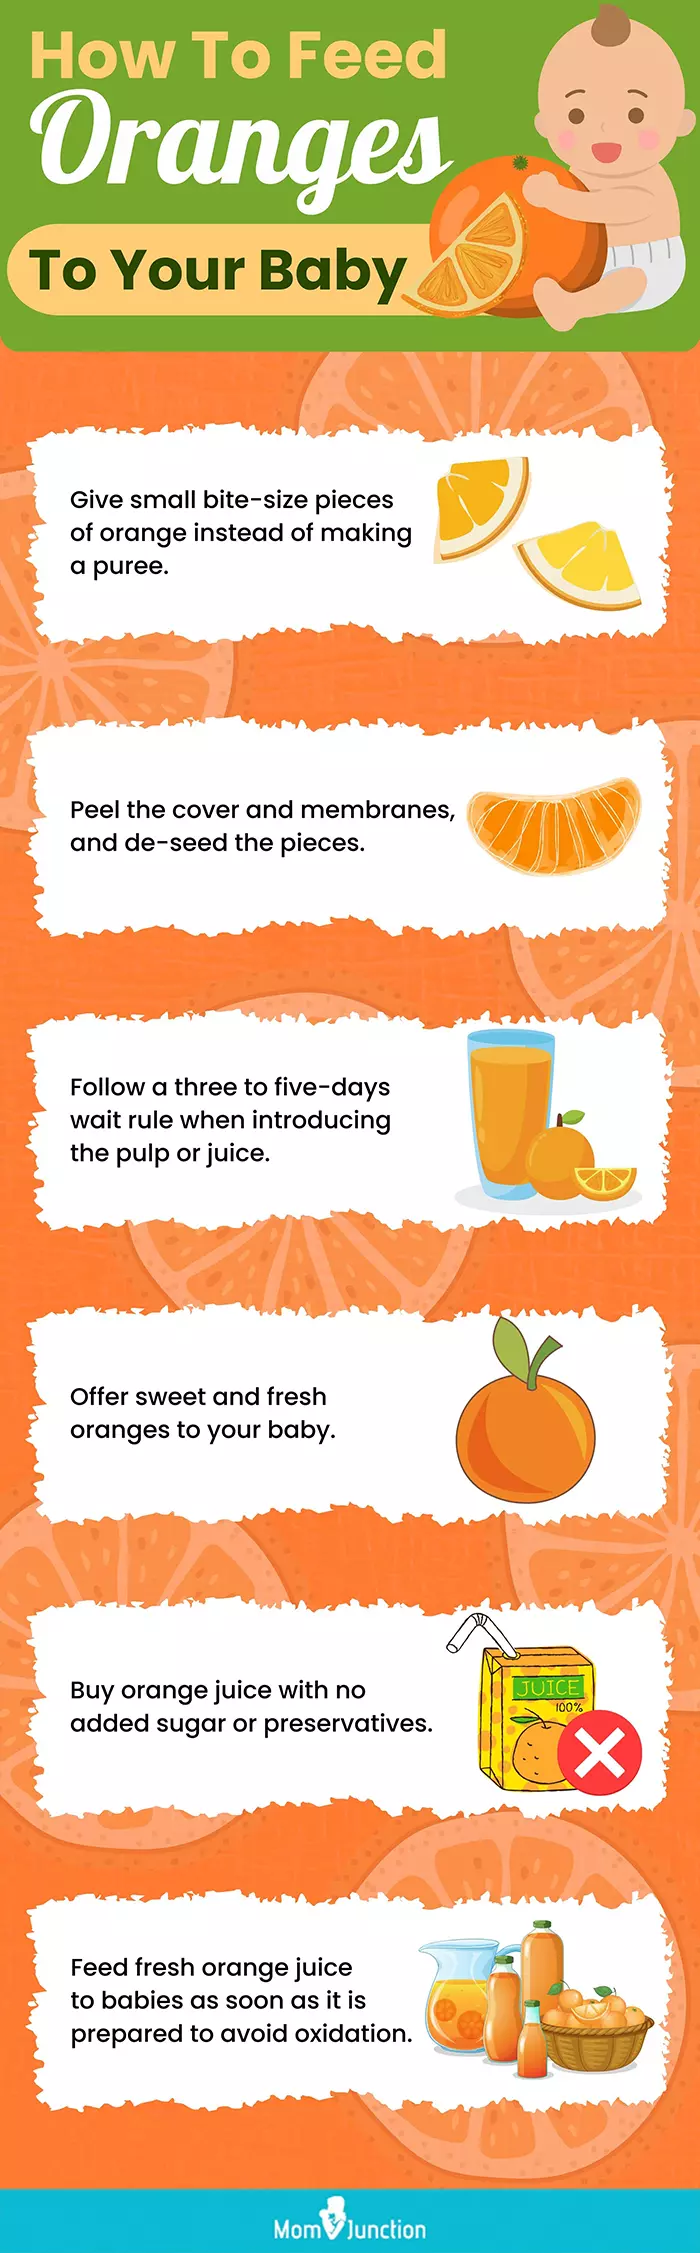 how to feed oranges to your baby (infographic)